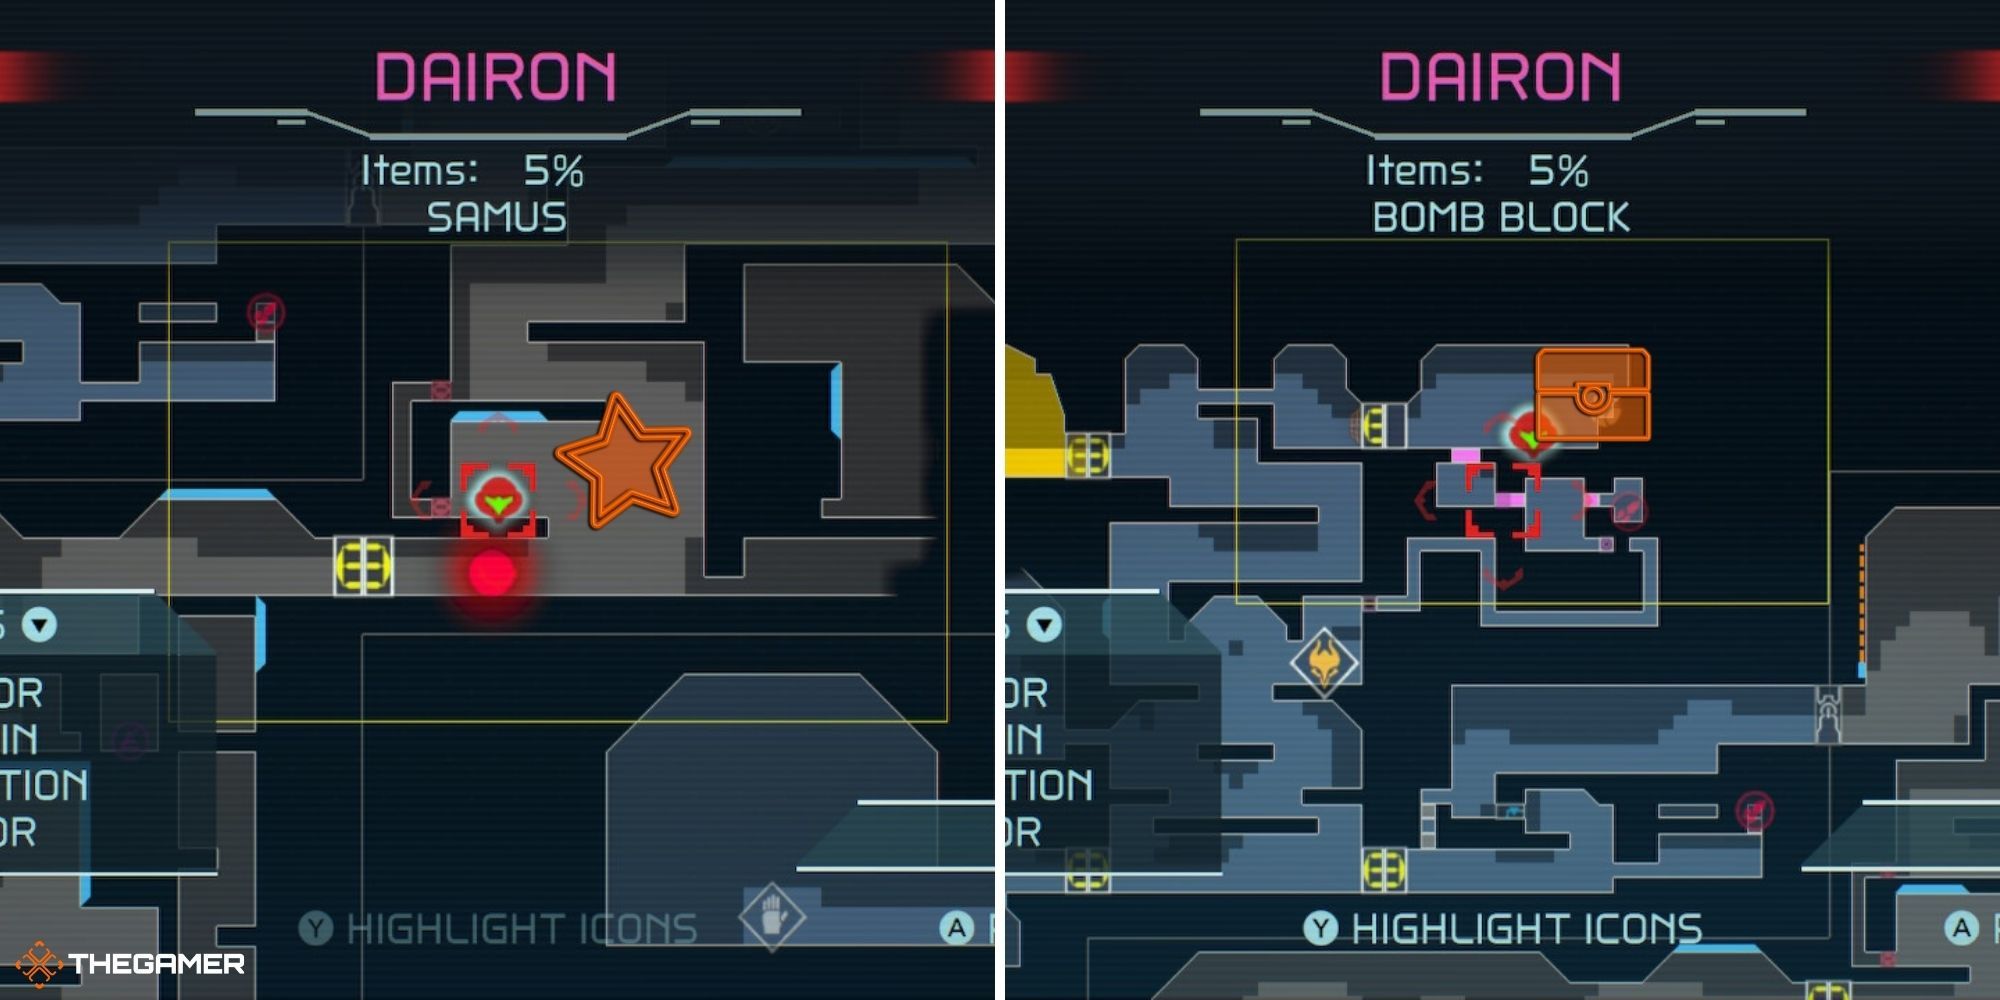 Metroid Dread - Map of Dairon with locations of the slide jump and bomb upgrade marked